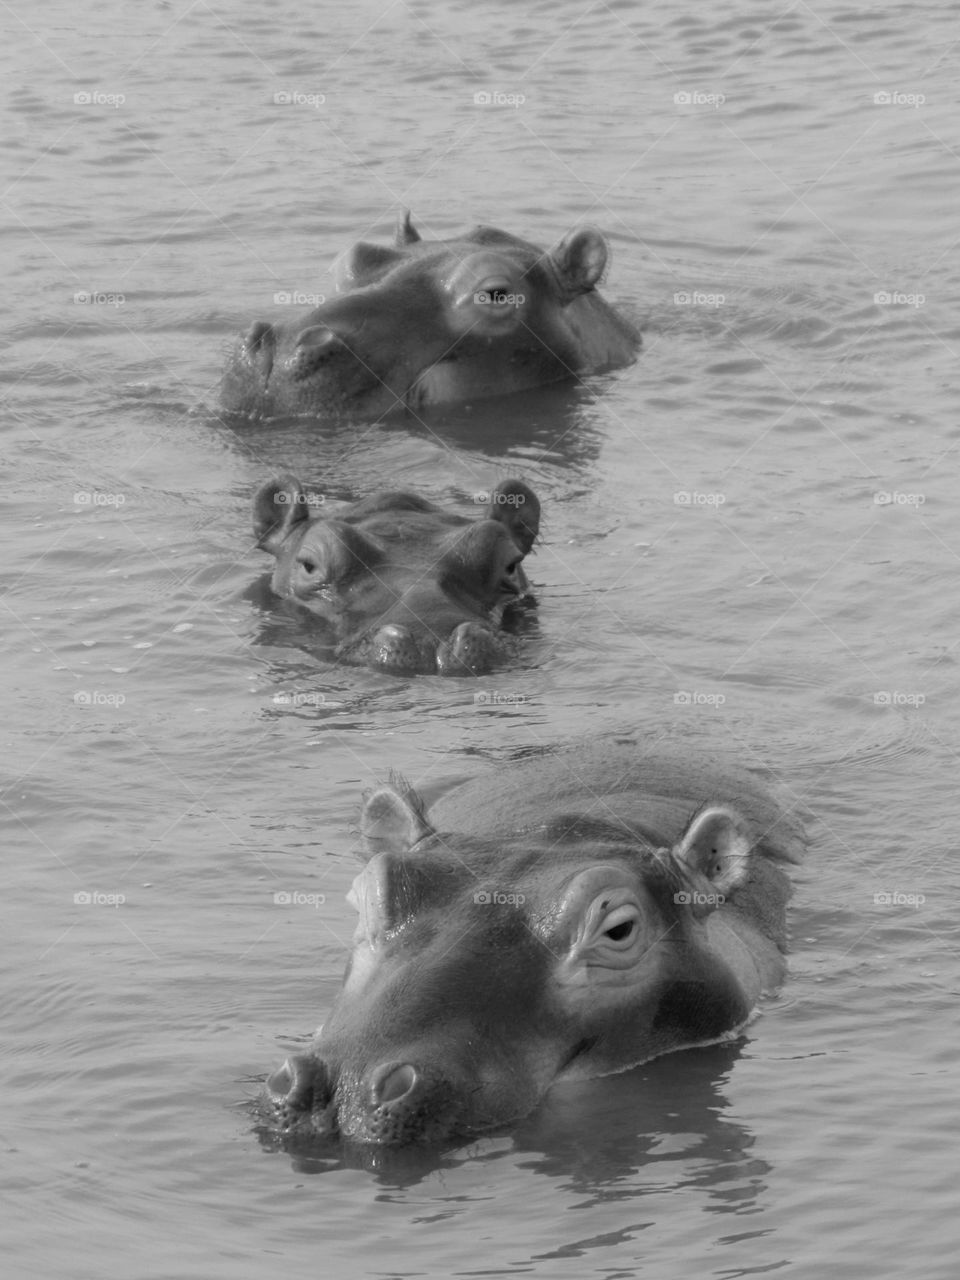 hippos the most dangerous animal for humans making an approach.